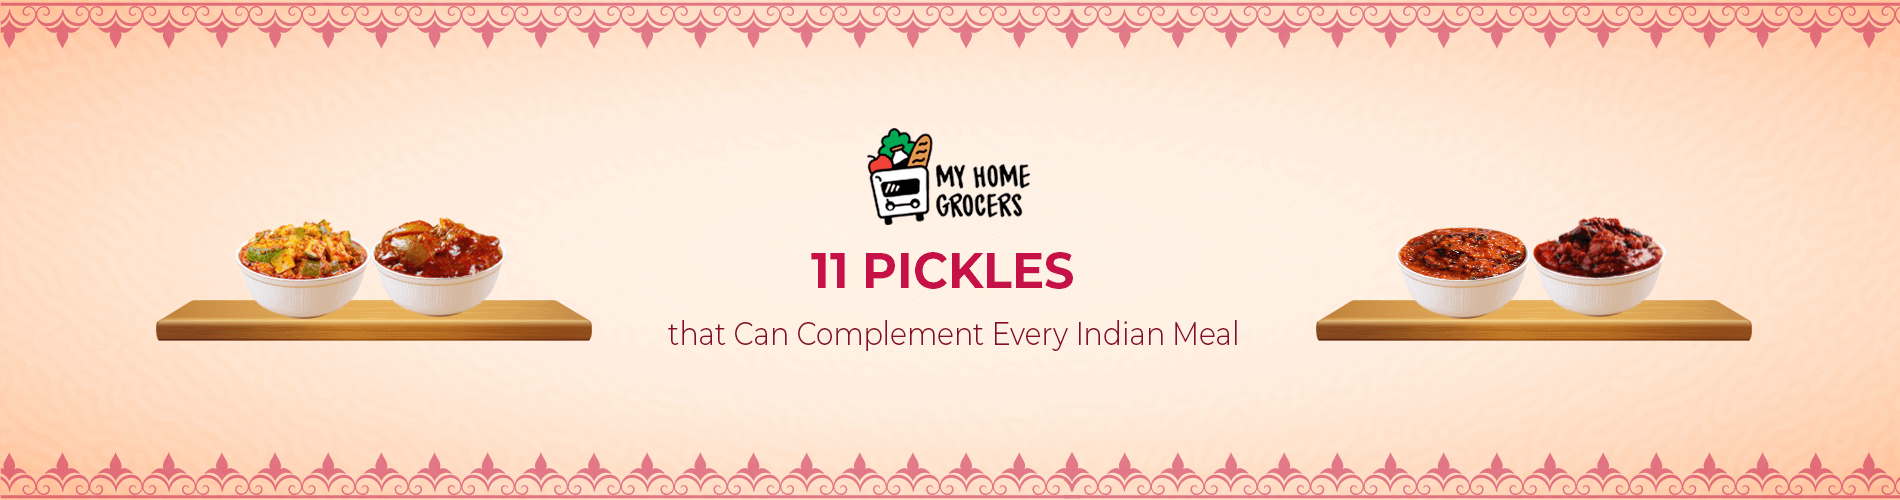 11 Pickles that Can Complement Every Indian Meal